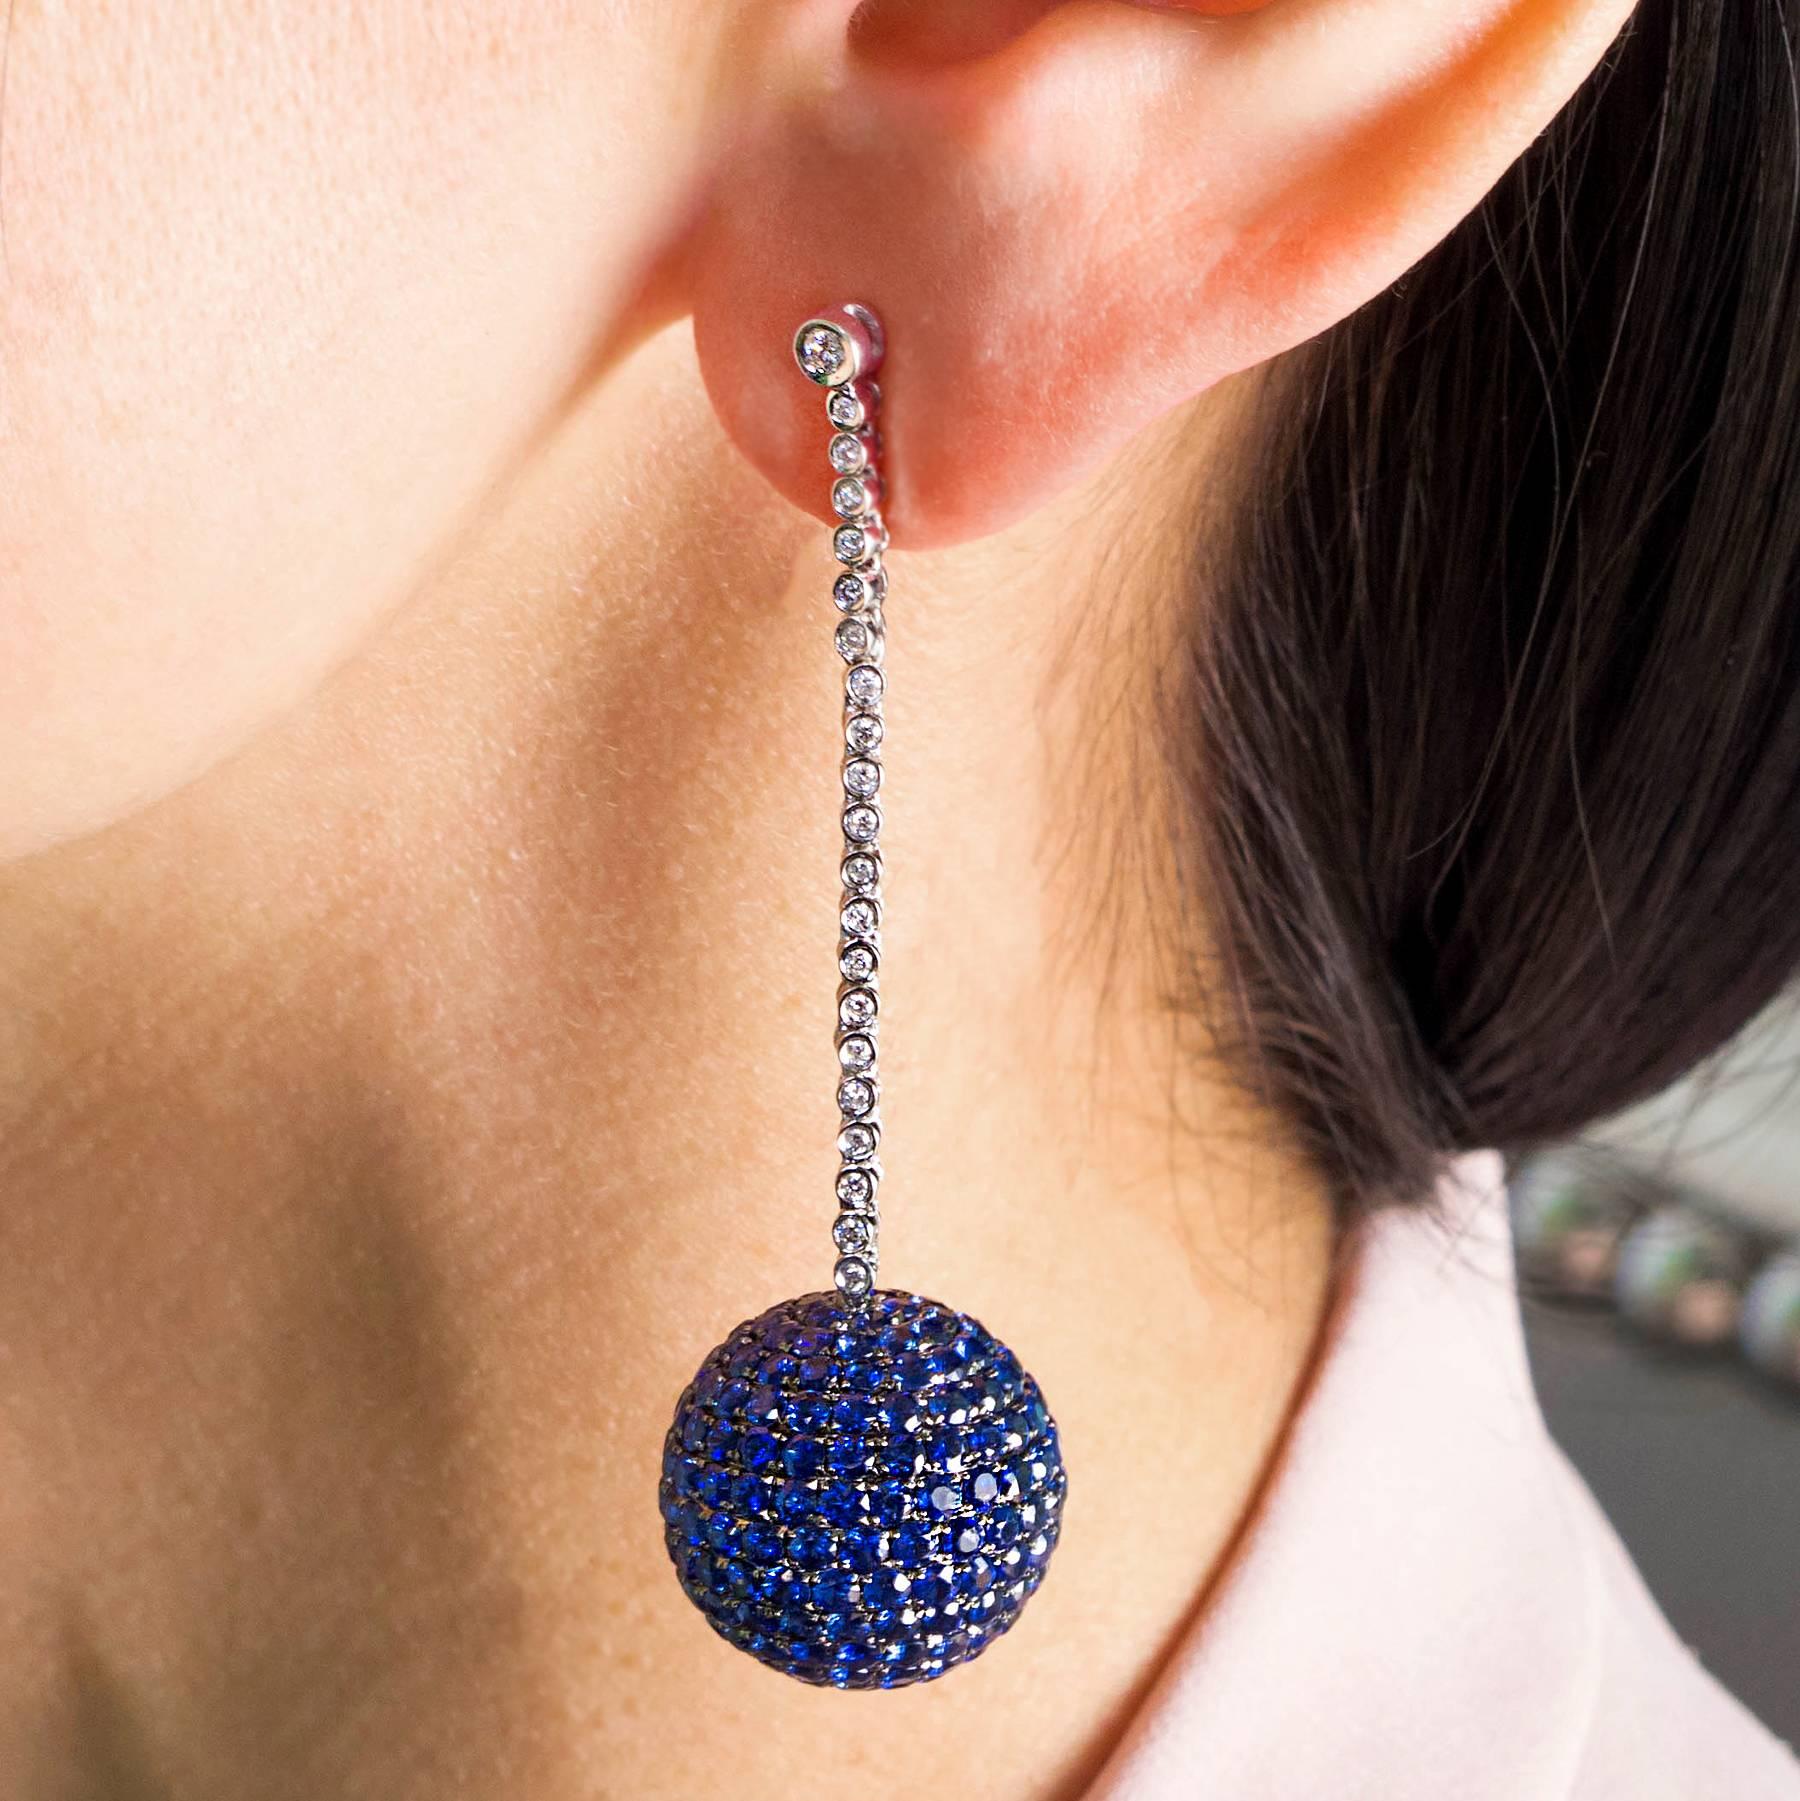 A pair of 20mm Blue Sapphire bead set orbs are suspended from flexible Diamond Line drops in these dramatic earrings.

The orbs hold 454 natural Blue Sapphires, totaling approximately 17.35 carats for the pair.

There are 42 round Brilliant cut